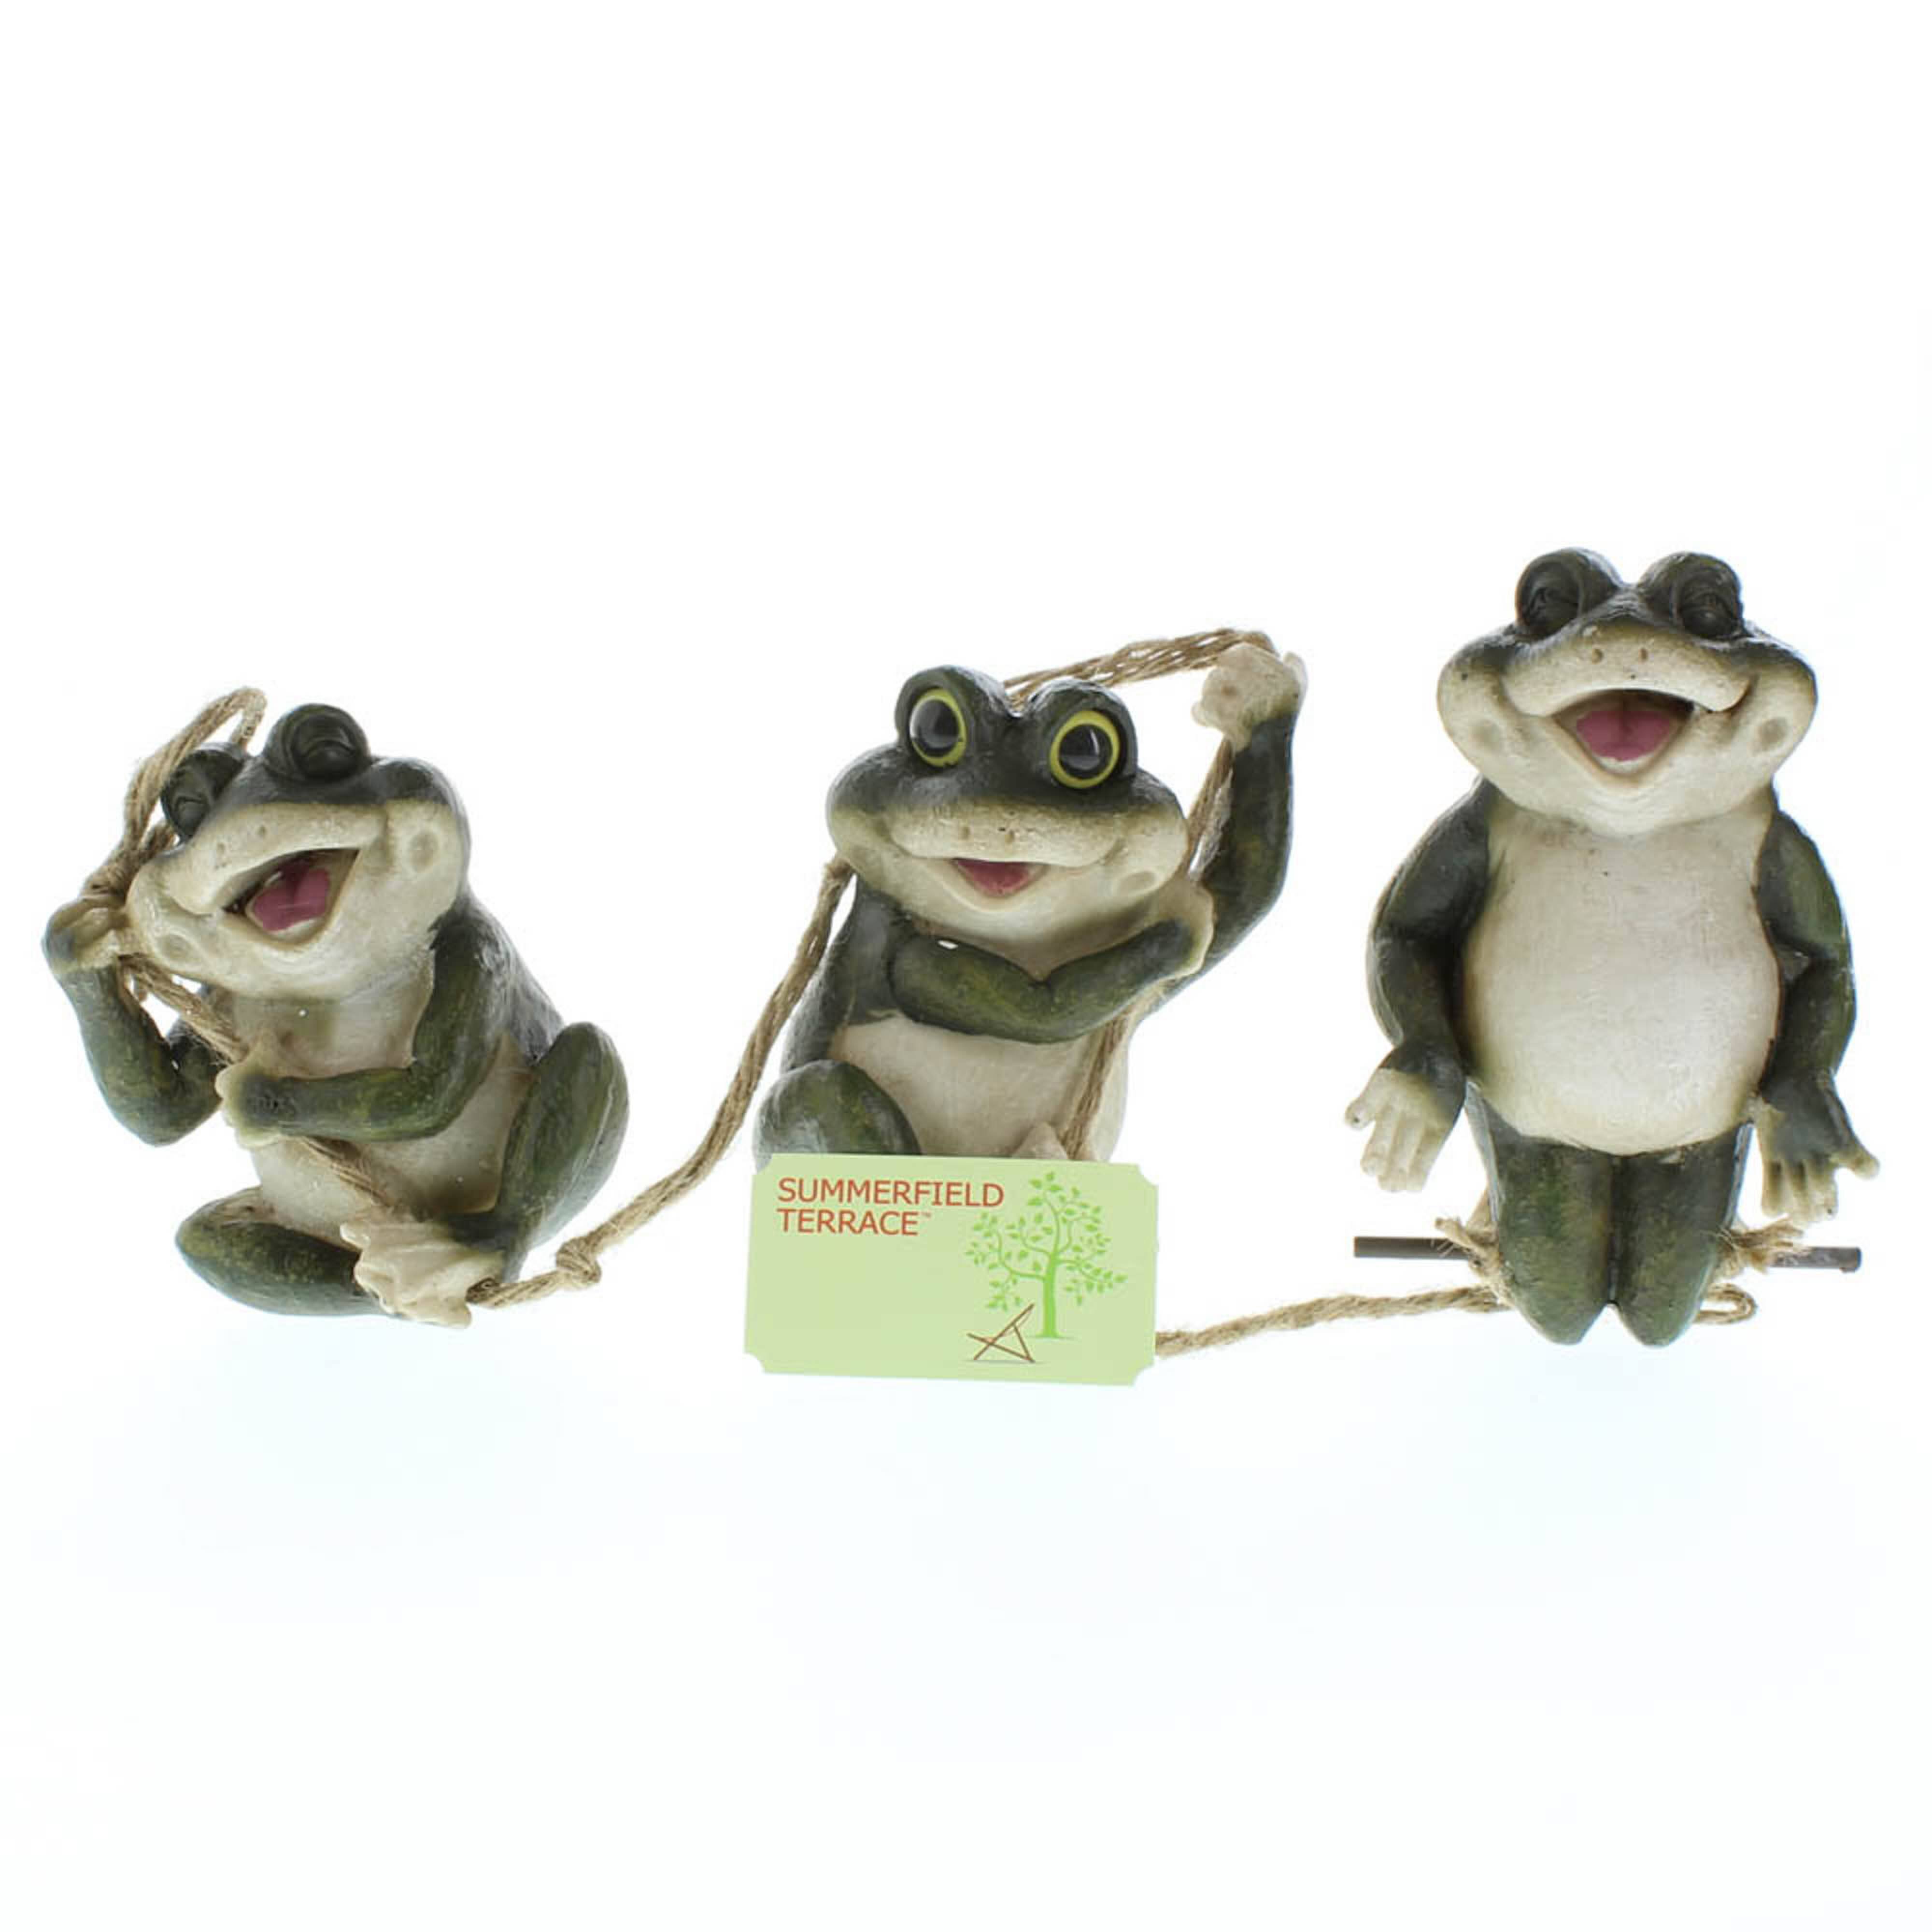 Gifts & Decor Frolicking Frogs Hanging Garden Sculpture Decorative 